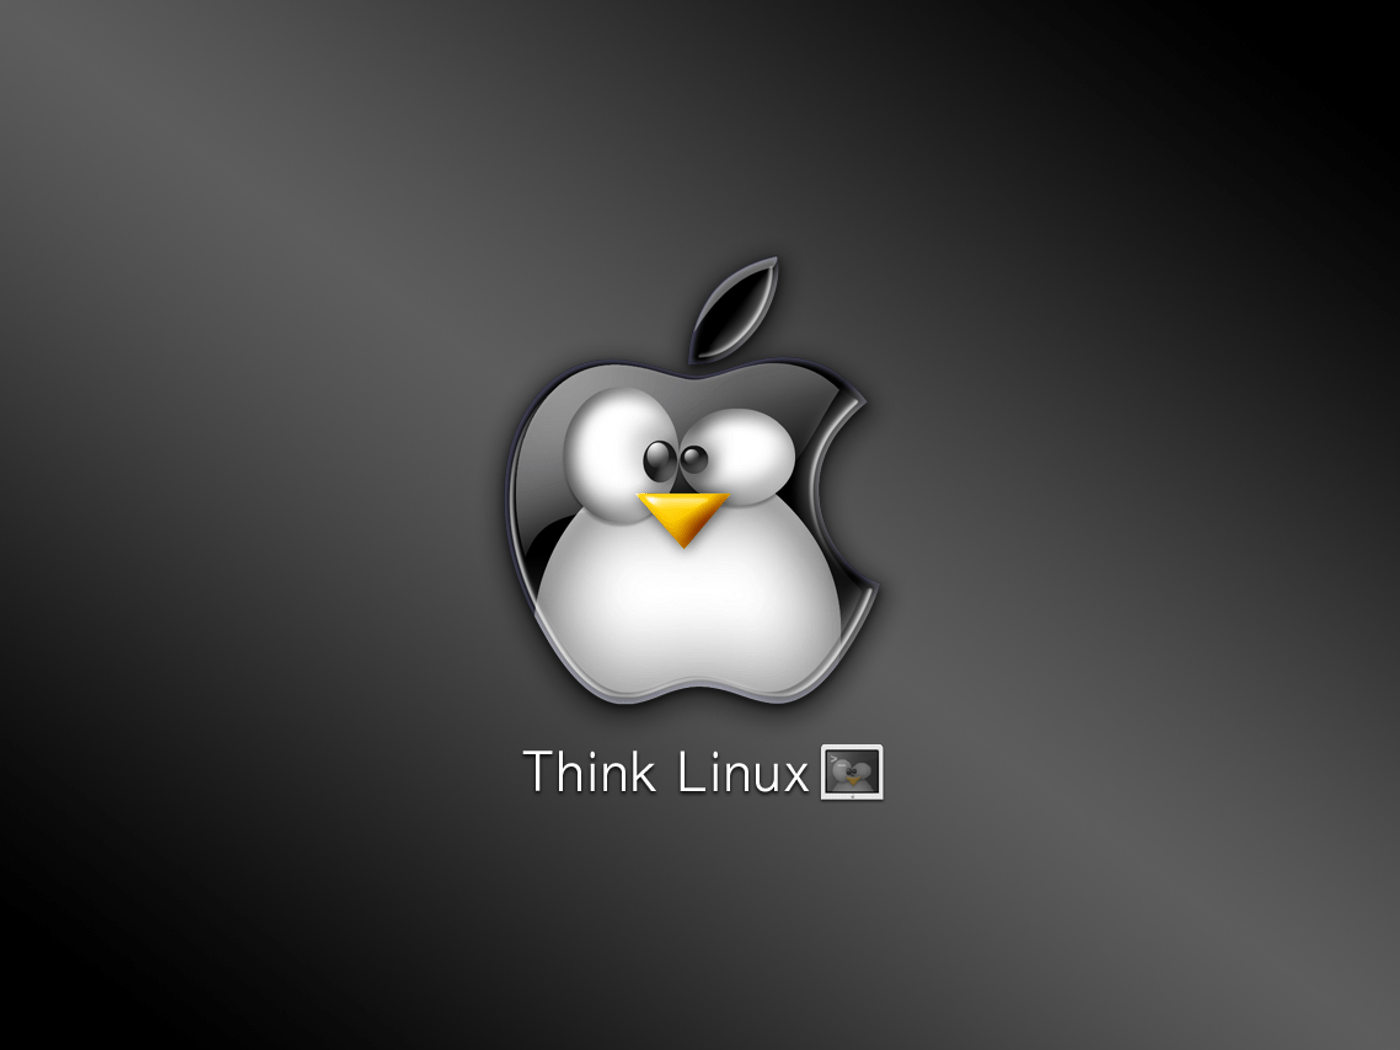 GNU LINUXdegrees